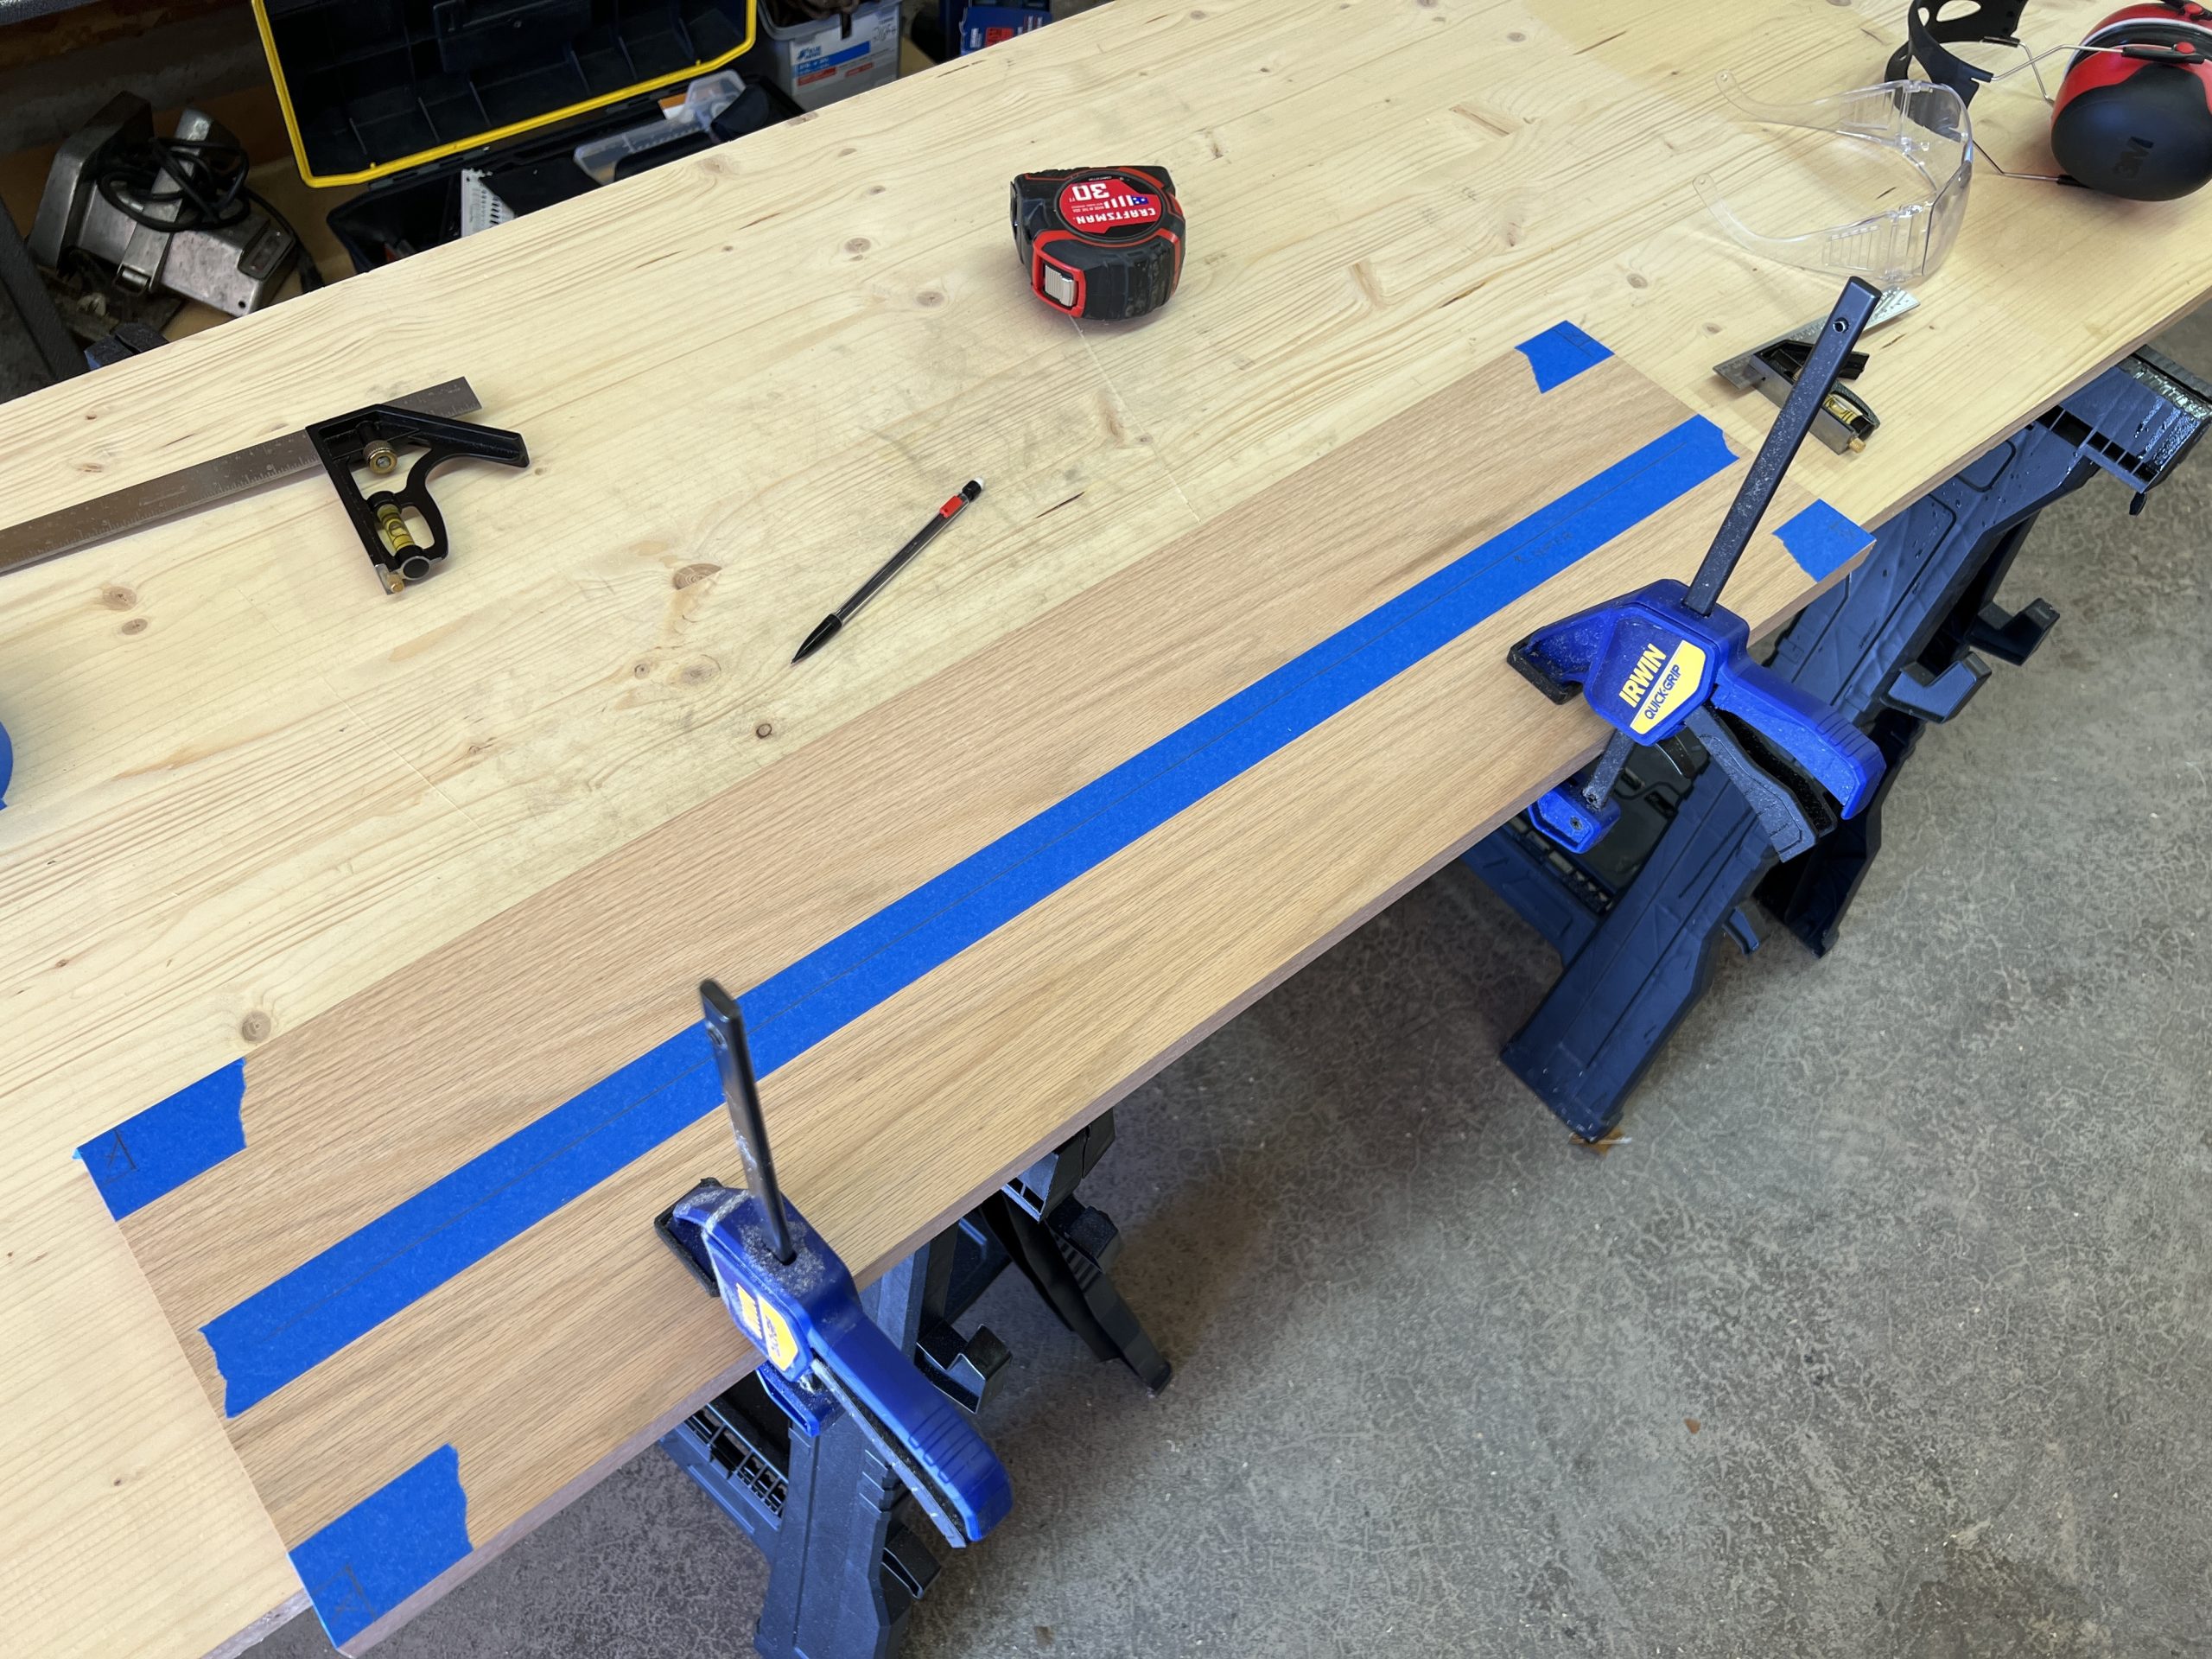 An oak board clamped to a woodworking bench. Painter’s tape covers the corners and midline where measurements are marked.